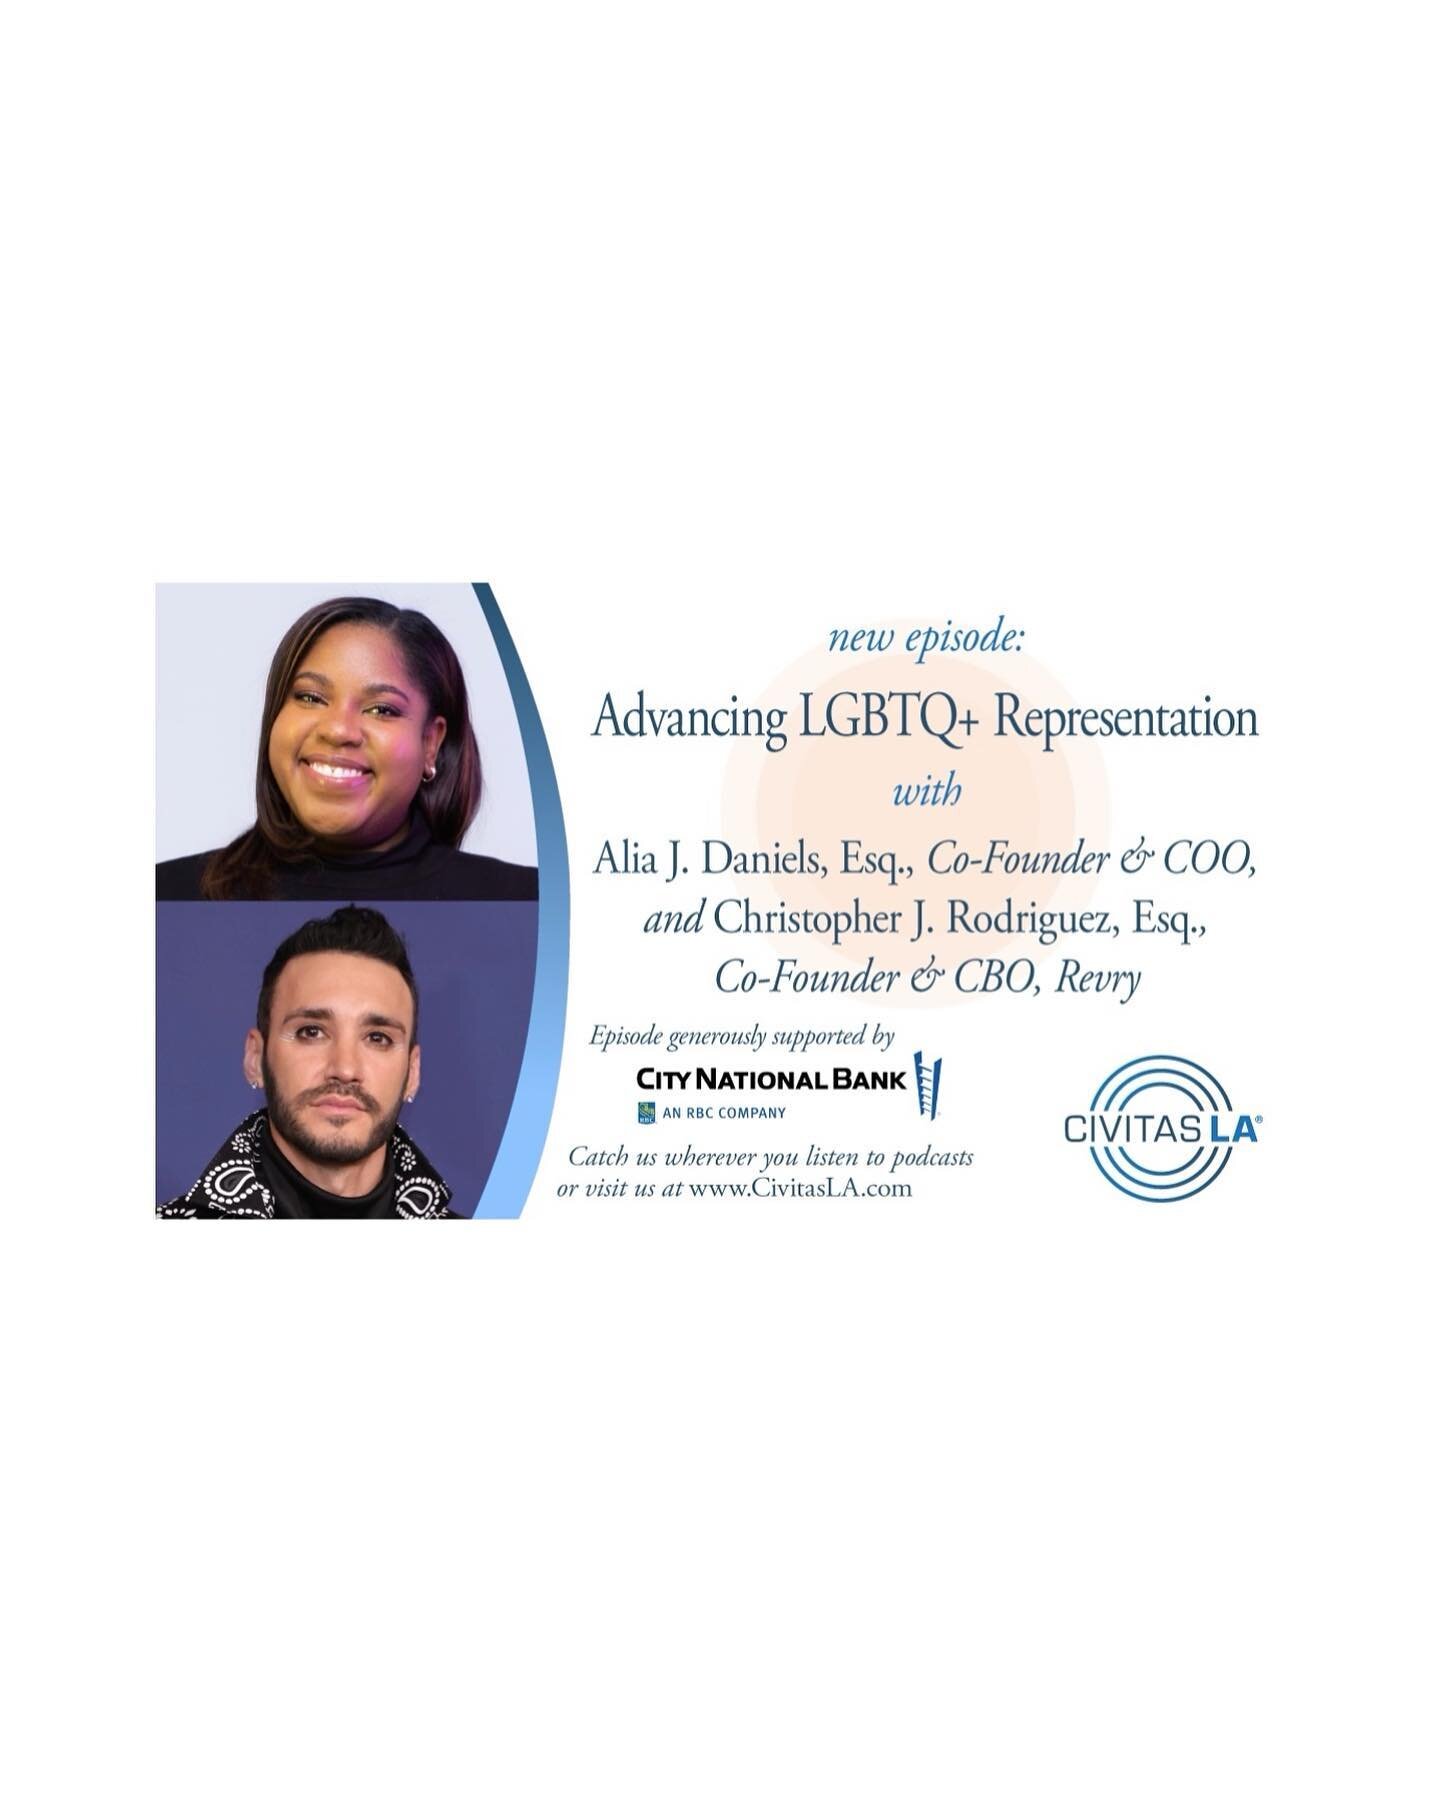 Had a lovely time chatting with Dwayne Gathers and my co-founder Chris for @civitas_la . Check out our episode on advancing LGBTQ+ representation via the link in bio.